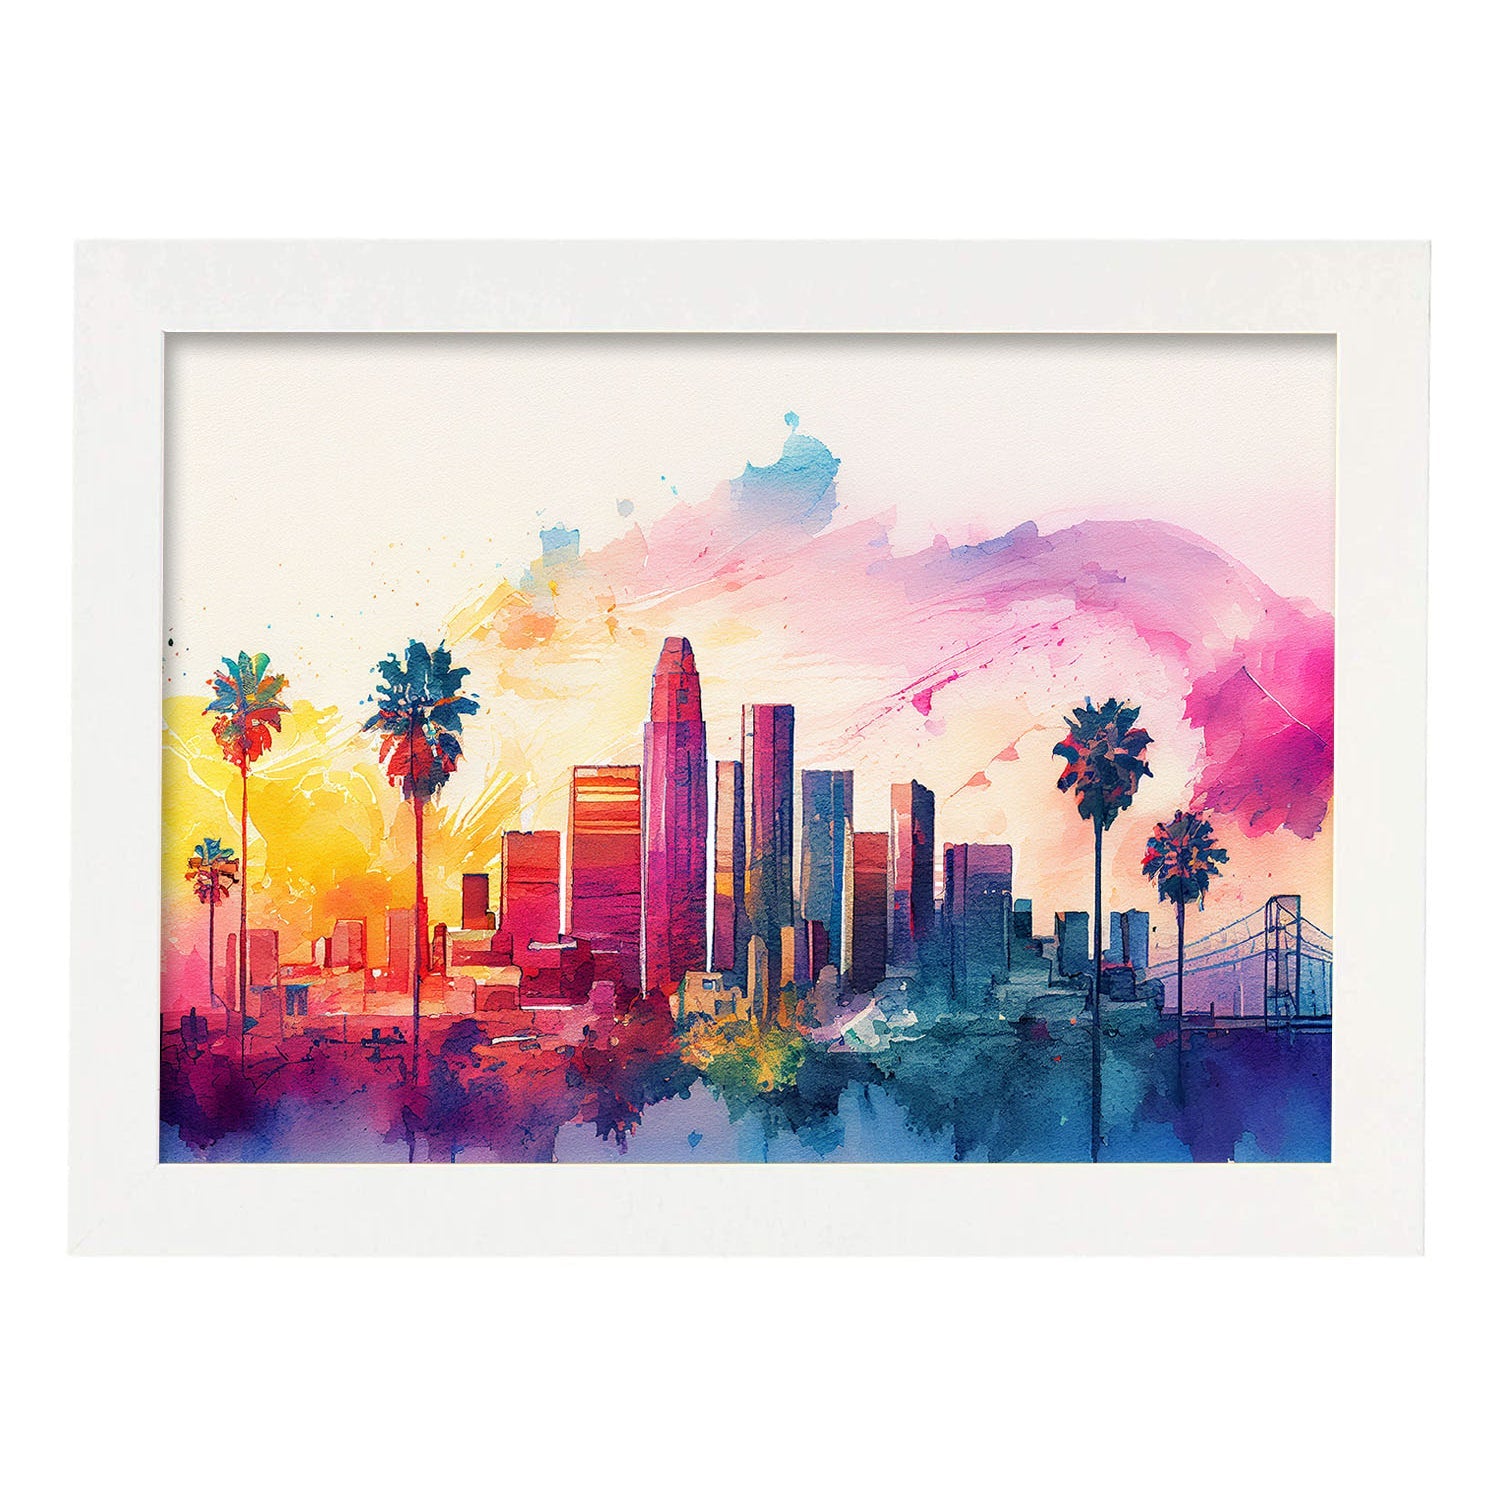 Nacnic watercolor of a skyline of the city of Los Angeles_3. Aesthetic Wall Art Prints for Bedroom or Living Room Design.-Artwork-Nacnic-A4-Marco Blanco-Nacnic Estudio SL